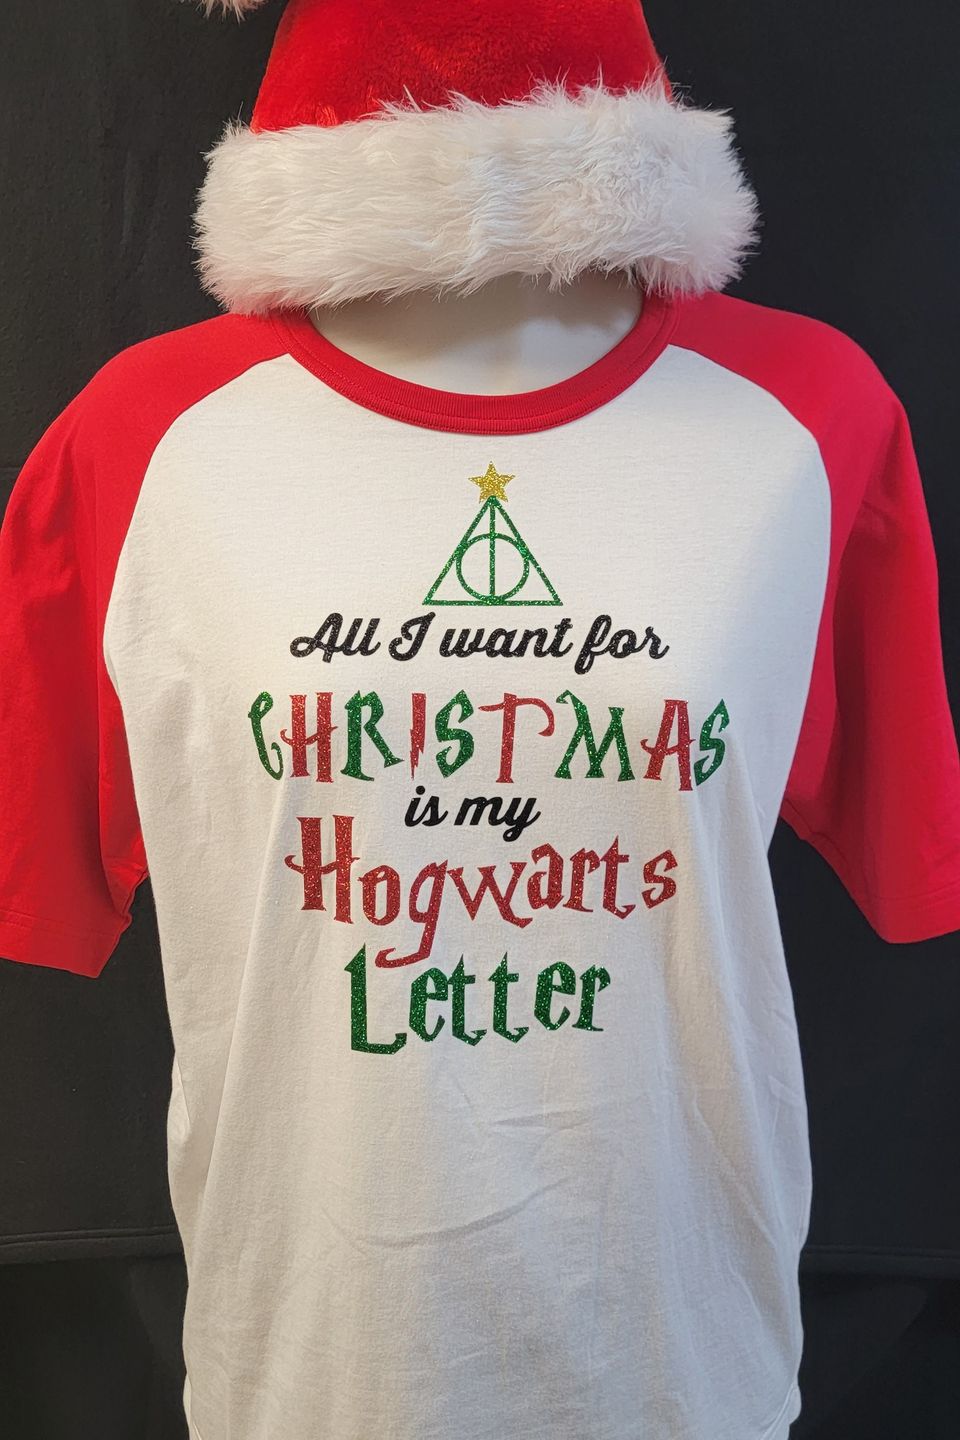 "DTF Direct-to-Film" example T-shirt - Christmas Hogwarts